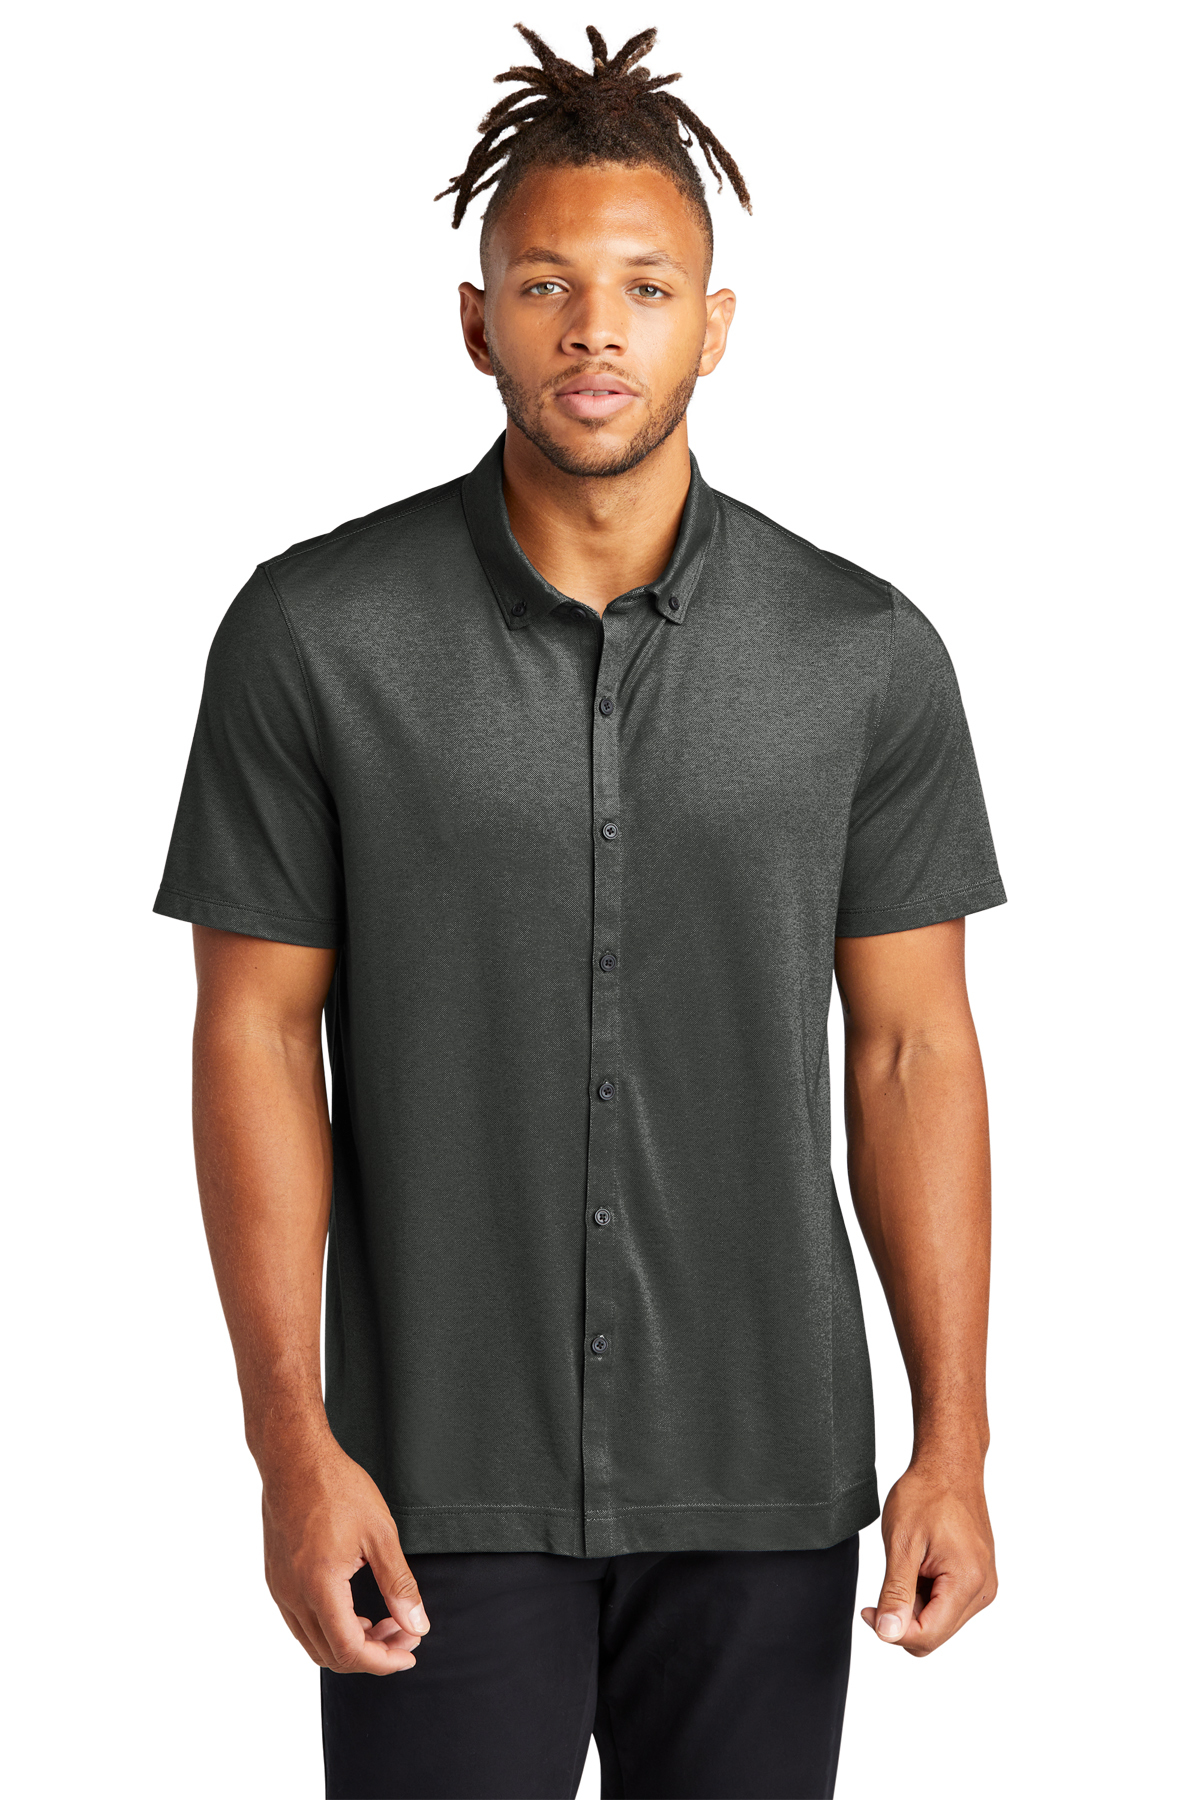 | Mercer+Mettle Stretch Polo | SanMar Full-Button Product Pique